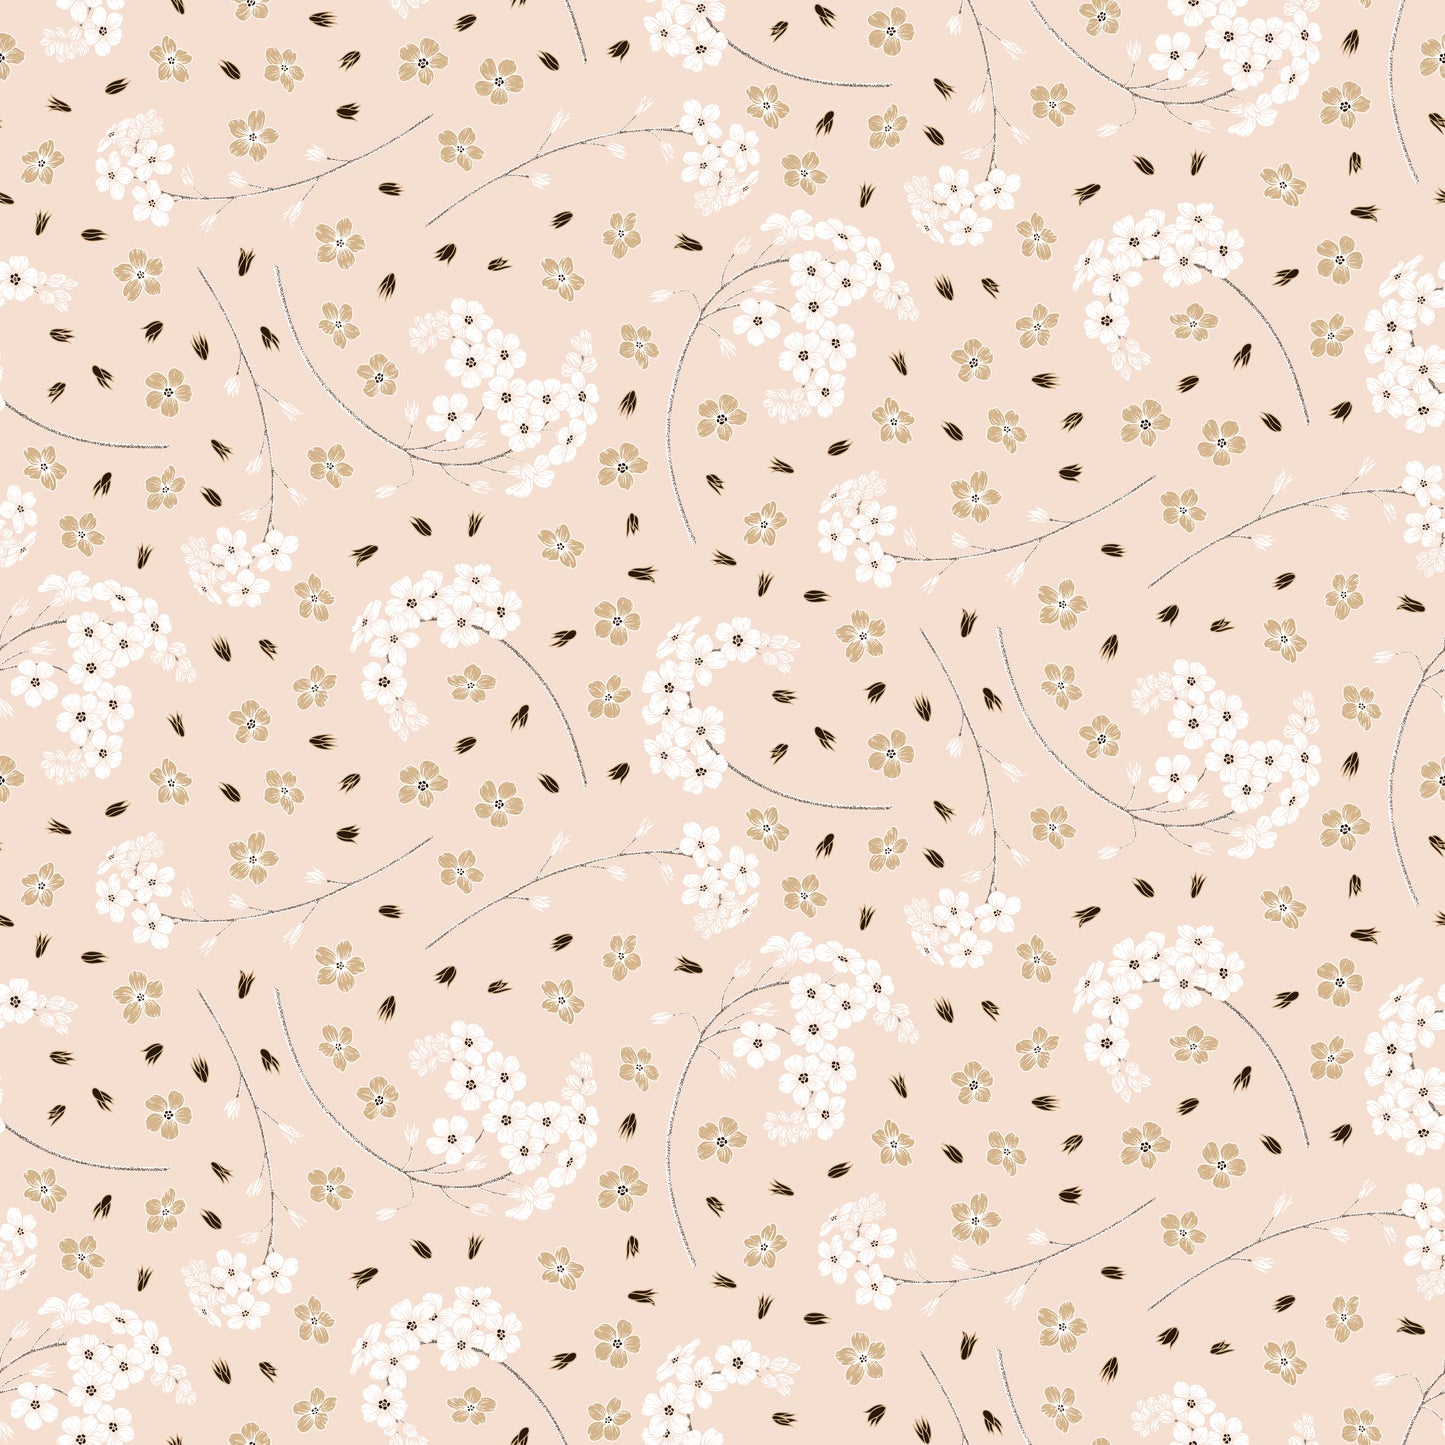 White forget me not flower print on pink/rose background easy to install and remove peel and stick custom wallpaper available in different lengths/sizes locally created and printed in Canada. Removable, washable, durable, commercial grade, customizable and water proof.